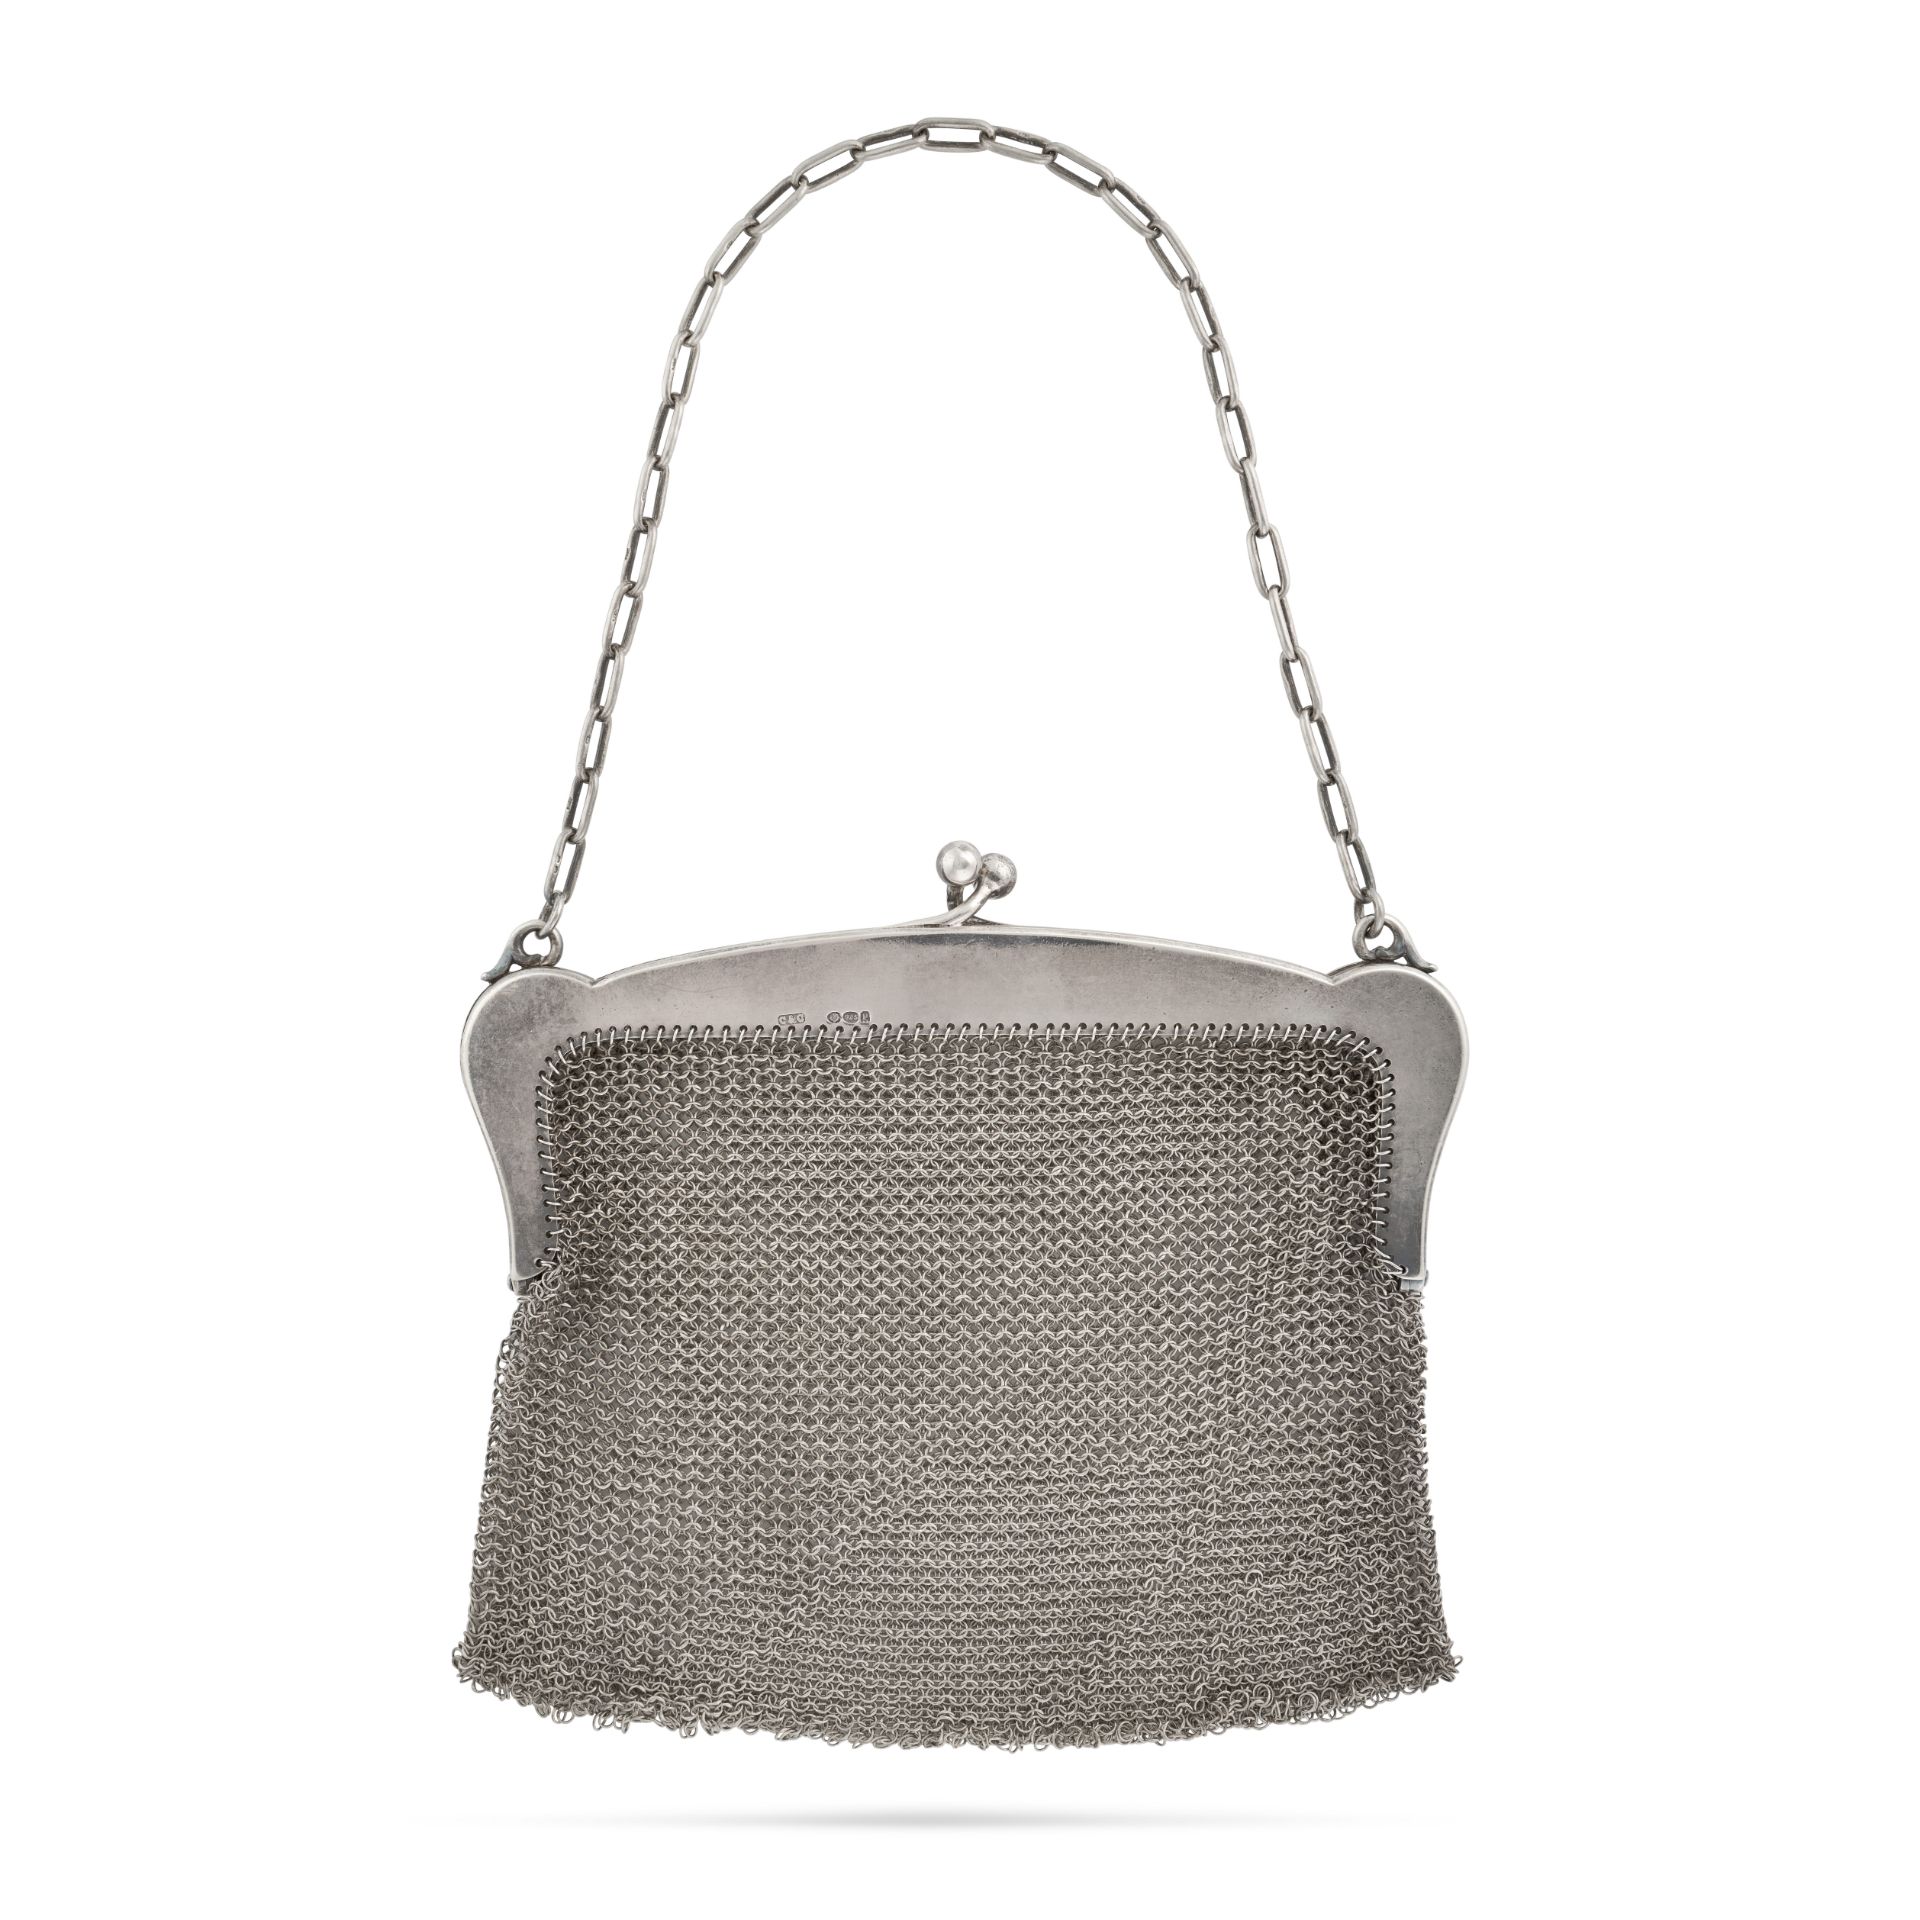 NO RESERVE - A SILVER MESH PURSE the tapering clasp suspending a mesh bag, British import marks, ...